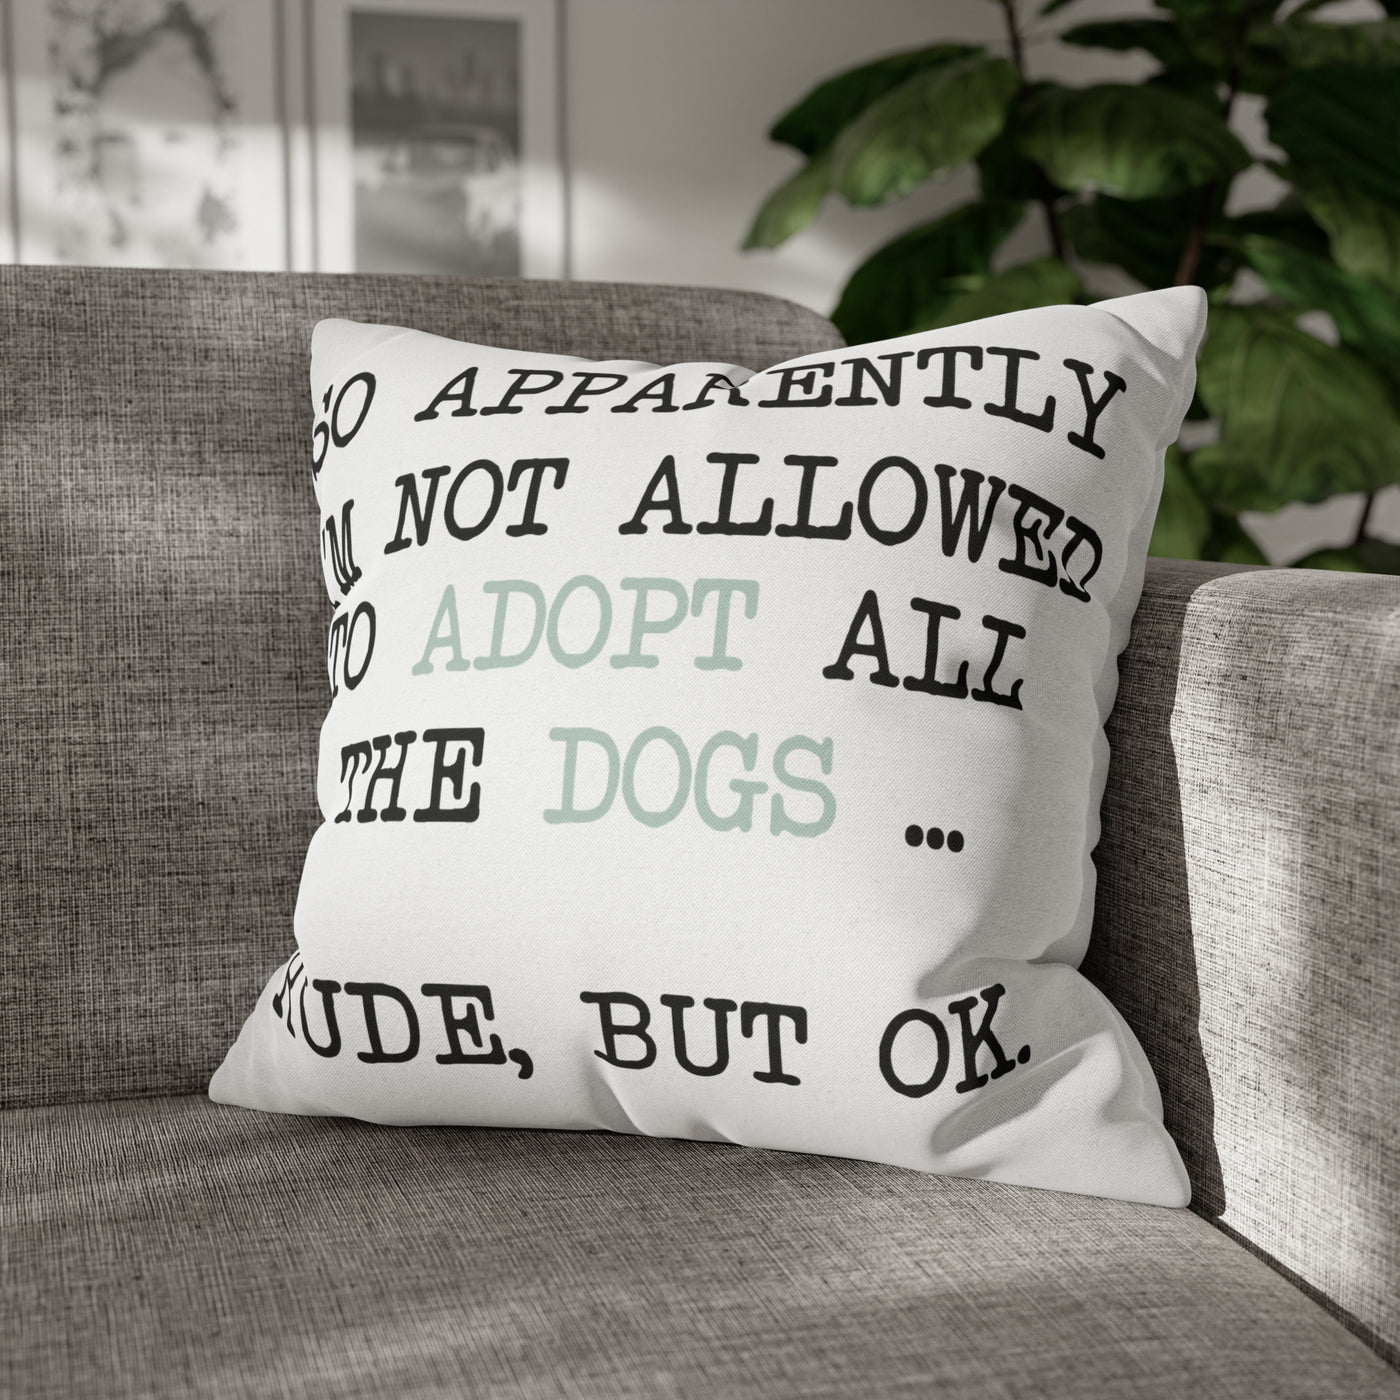 So Apparently I'm Not Allowed To Adopt All The Dogs ... Rude, But OK. Colored Print Square Pillow Case - Rocking The Dog Mom Life